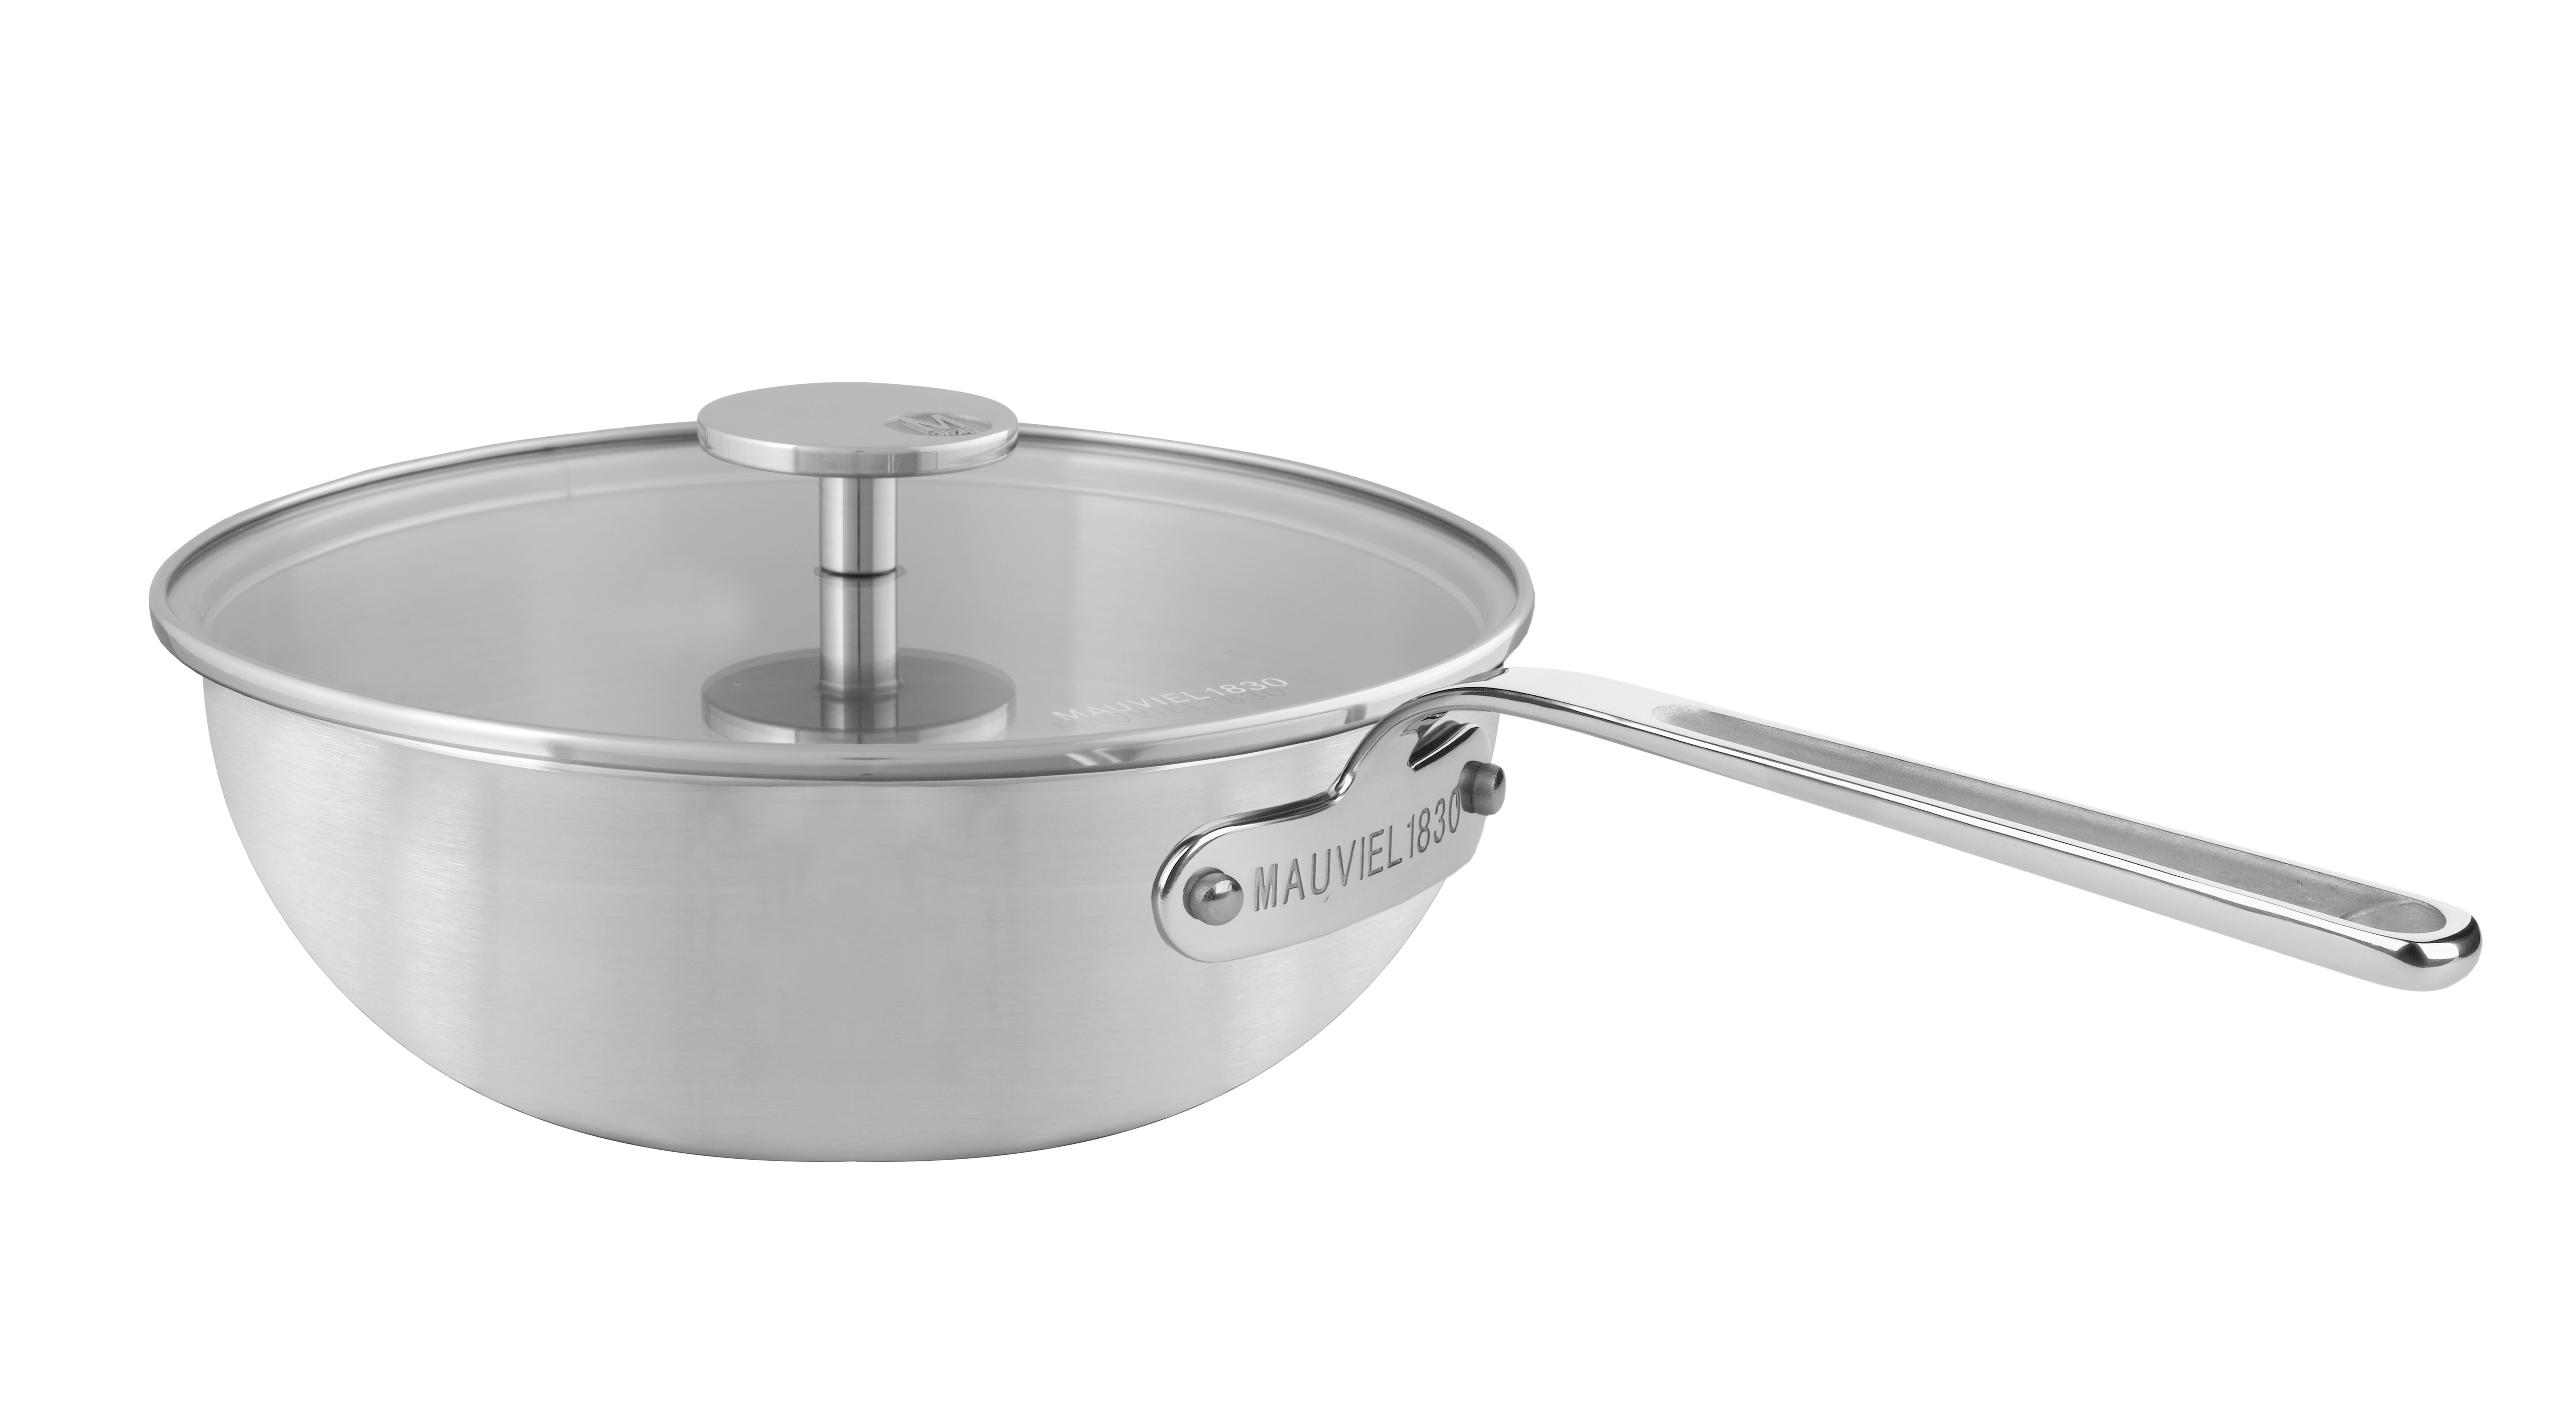 Saucepan With Lid, Aluminum Alloy Sauce Pan With Wooden Handle